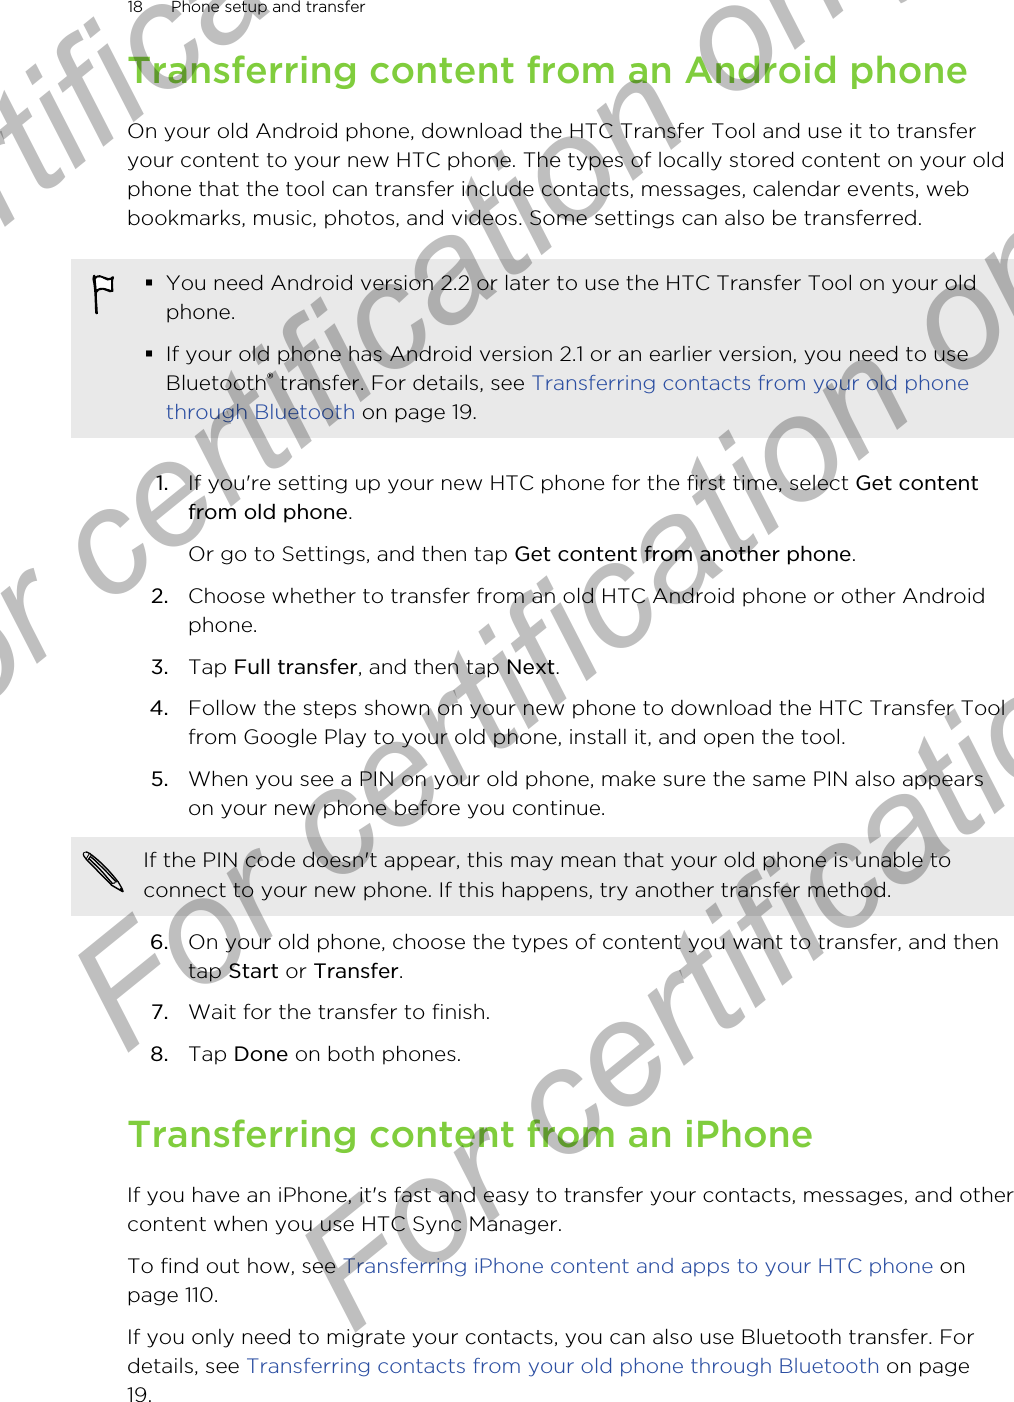 Transferring content from an Android phoneOn your old Android phone, download the HTC Transfer Tool and use it to transferyour content to your new HTC phone. The types of locally stored content on your oldphone that the tool can transfer include contacts, messages, calendar events, webbookmarks, music, photos, and videos. Some settings can also be transferred.§You need Android version 2.2 or later to use the HTC Transfer Tool on your oldphone.§If your old phone has Android version 2.1 or an earlier version, you need to useBluetooth® transfer. For details, see Transferring contacts from your old phonethrough Bluetooth on page 19.1. If you&apos;re setting up your new HTC phone for the first time, select Get contentfrom old phone. Or go to Settings, and then tap Get content from another phone.2. Choose whether to transfer from an old HTC Android phone or other Androidphone.3. Tap Full transfer, and then tap Next.4. Follow the steps shown on your new phone to download the HTC Transfer Toolfrom Google Play to your old phone, install it, and open the tool.5. When you see a PIN on your old phone, make sure the same PIN also appearson your new phone before you continue. If the PIN code doesn&apos;t appear, this may mean that your old phone is unable toconnect to your new phone. If this happens, try another transfer method.6. On your old phone, choose the types of content you want to transfer, and thentap Start or Transfer.7. Wait for the transfer to finish.8. Tap Done on both phones.Transferring content from an iPhoneIf you have an iPhone, it&apos;s fast and easy to transfer your contacts, messages, and othercontent when you use HTC Sync Manager.To find out how, see Transferring iPhone content and apps to your HTC phone onpage 110.If you only need to migrate your contacts, you can also use Bluetooth transfer. Fordetails, see Transferring contacts from your old phone through Bluetooth on page19.18 Phone setup and transferFor certification only  For certification only  For certification only  For certification only 